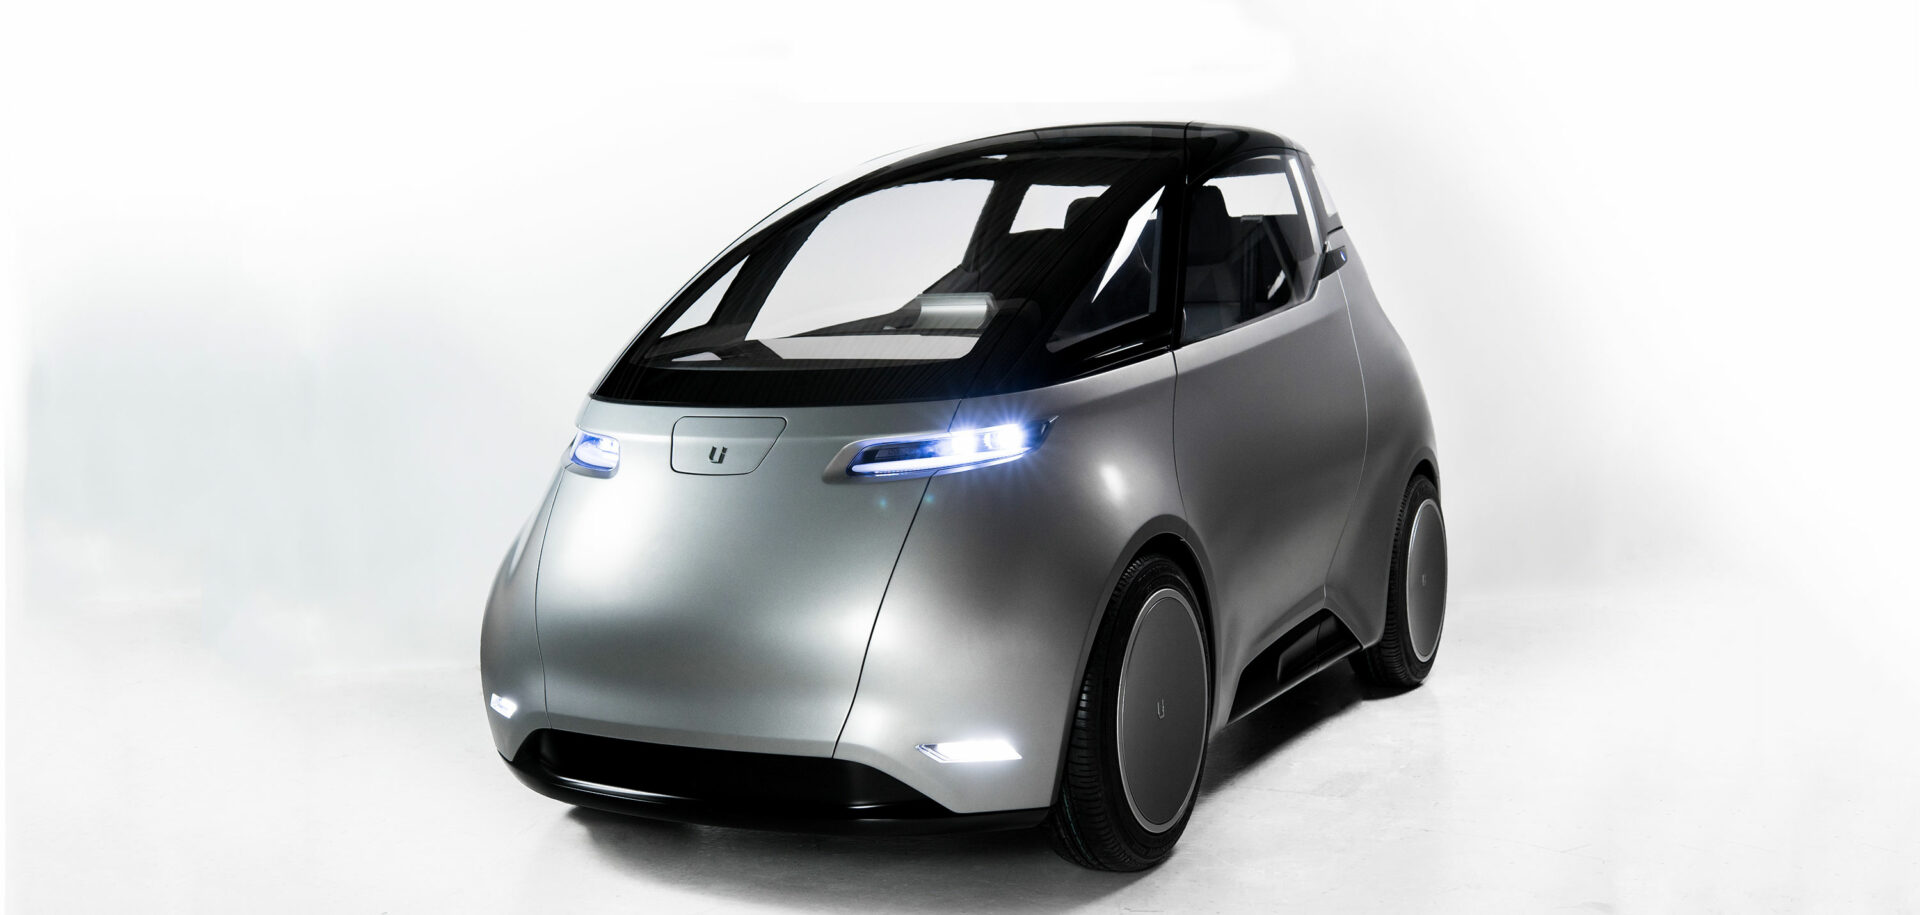 Uniti’s two-seater is a lightweight car that can reach speeds of more than 55 mph.